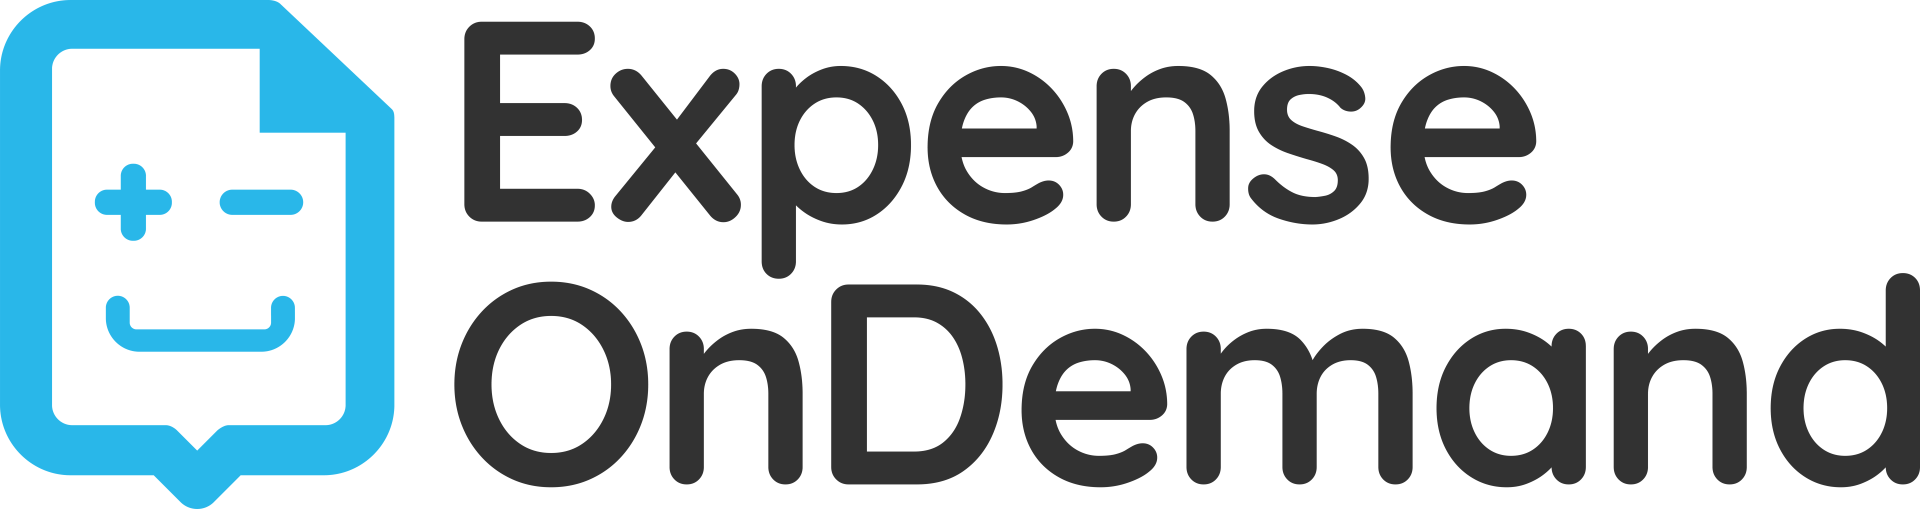 Per Diem Meaning from ExpenseOnDemand logo